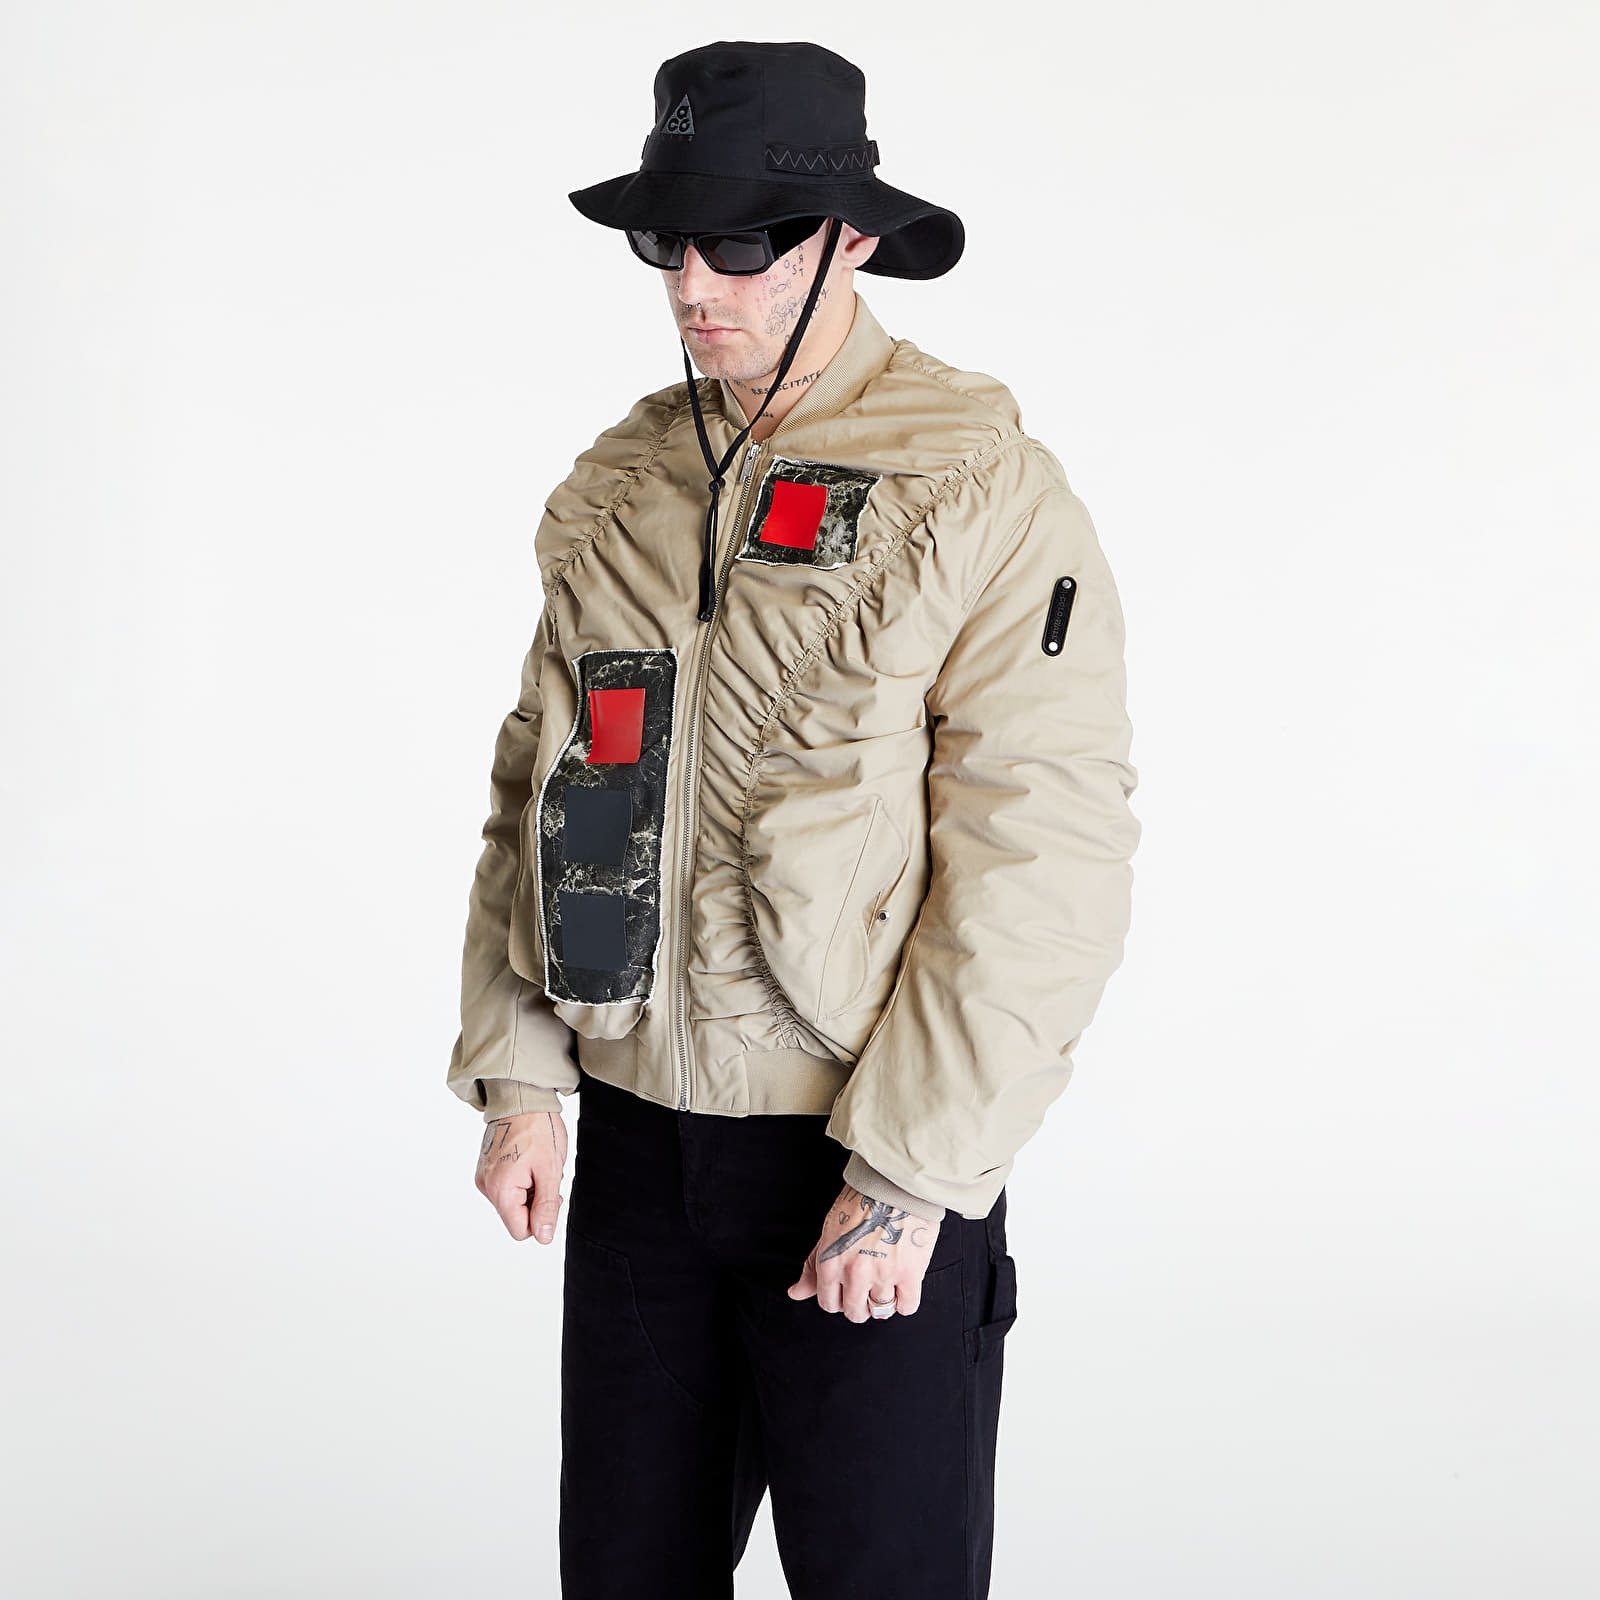 Cubist Ruched Bomber